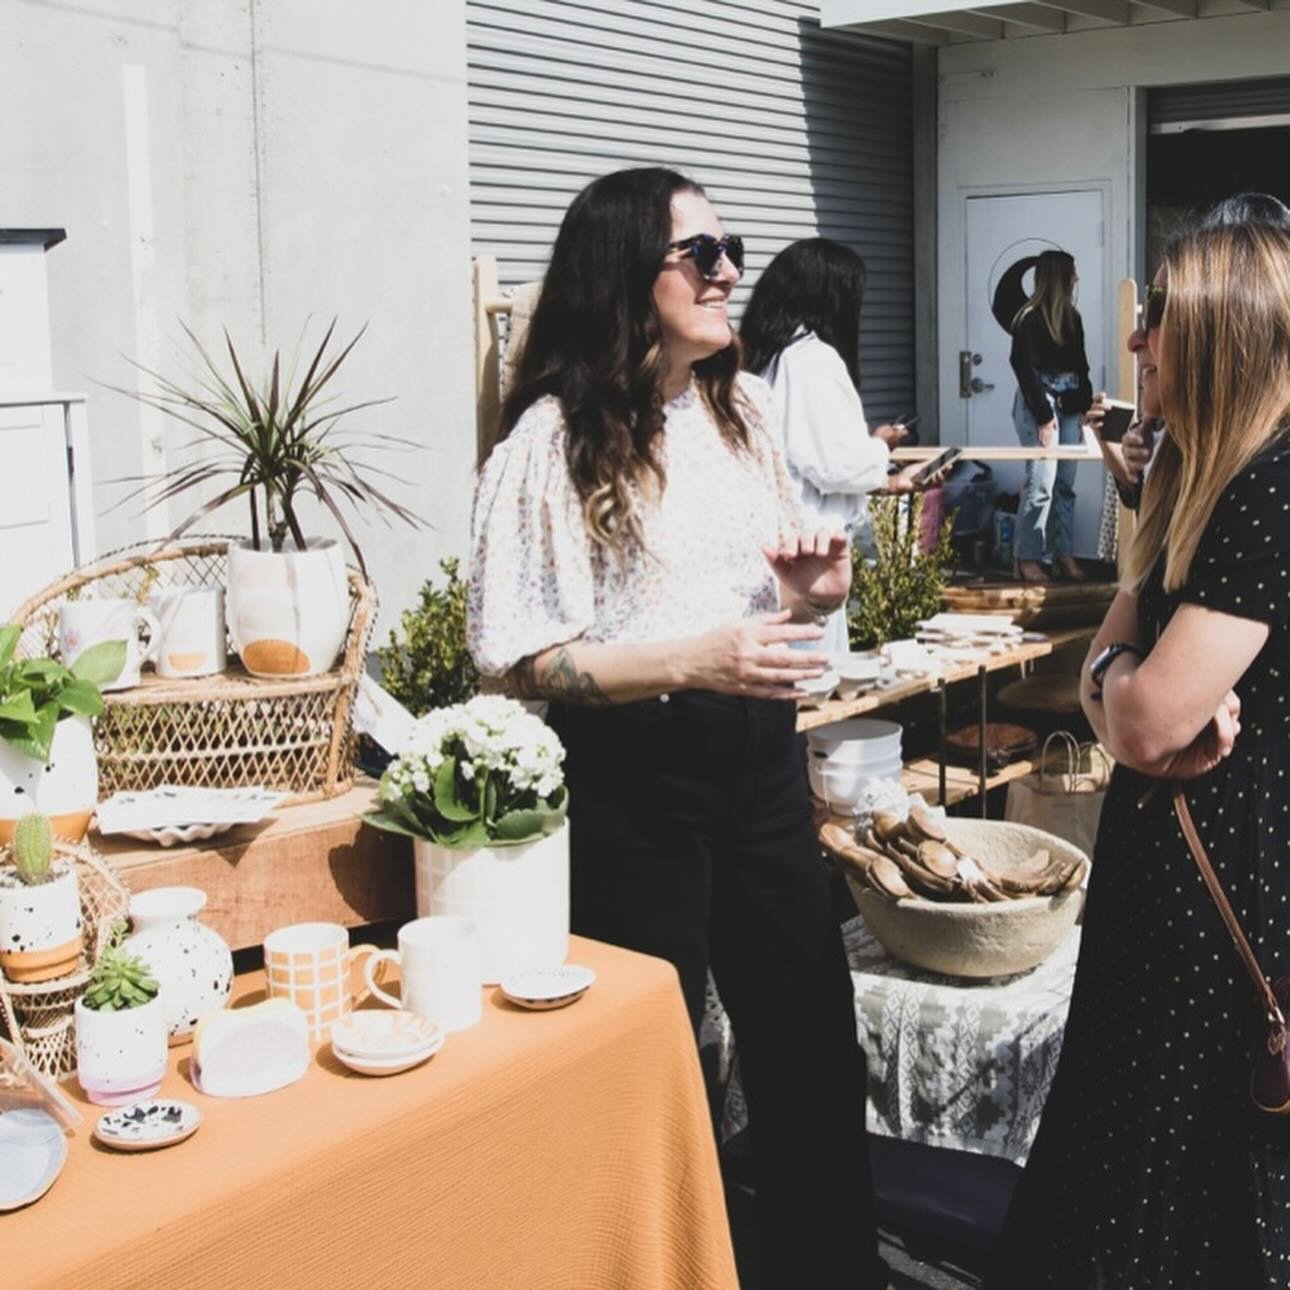 This photo of me chatting with @jennaharmony at our recent Girls in the Garden event is just perfect! 

Also 

@mat3.photography never fails to capture me and my work beautifully!

#lunareececeramics 
#lunareecepottery 
#handmadeceramics